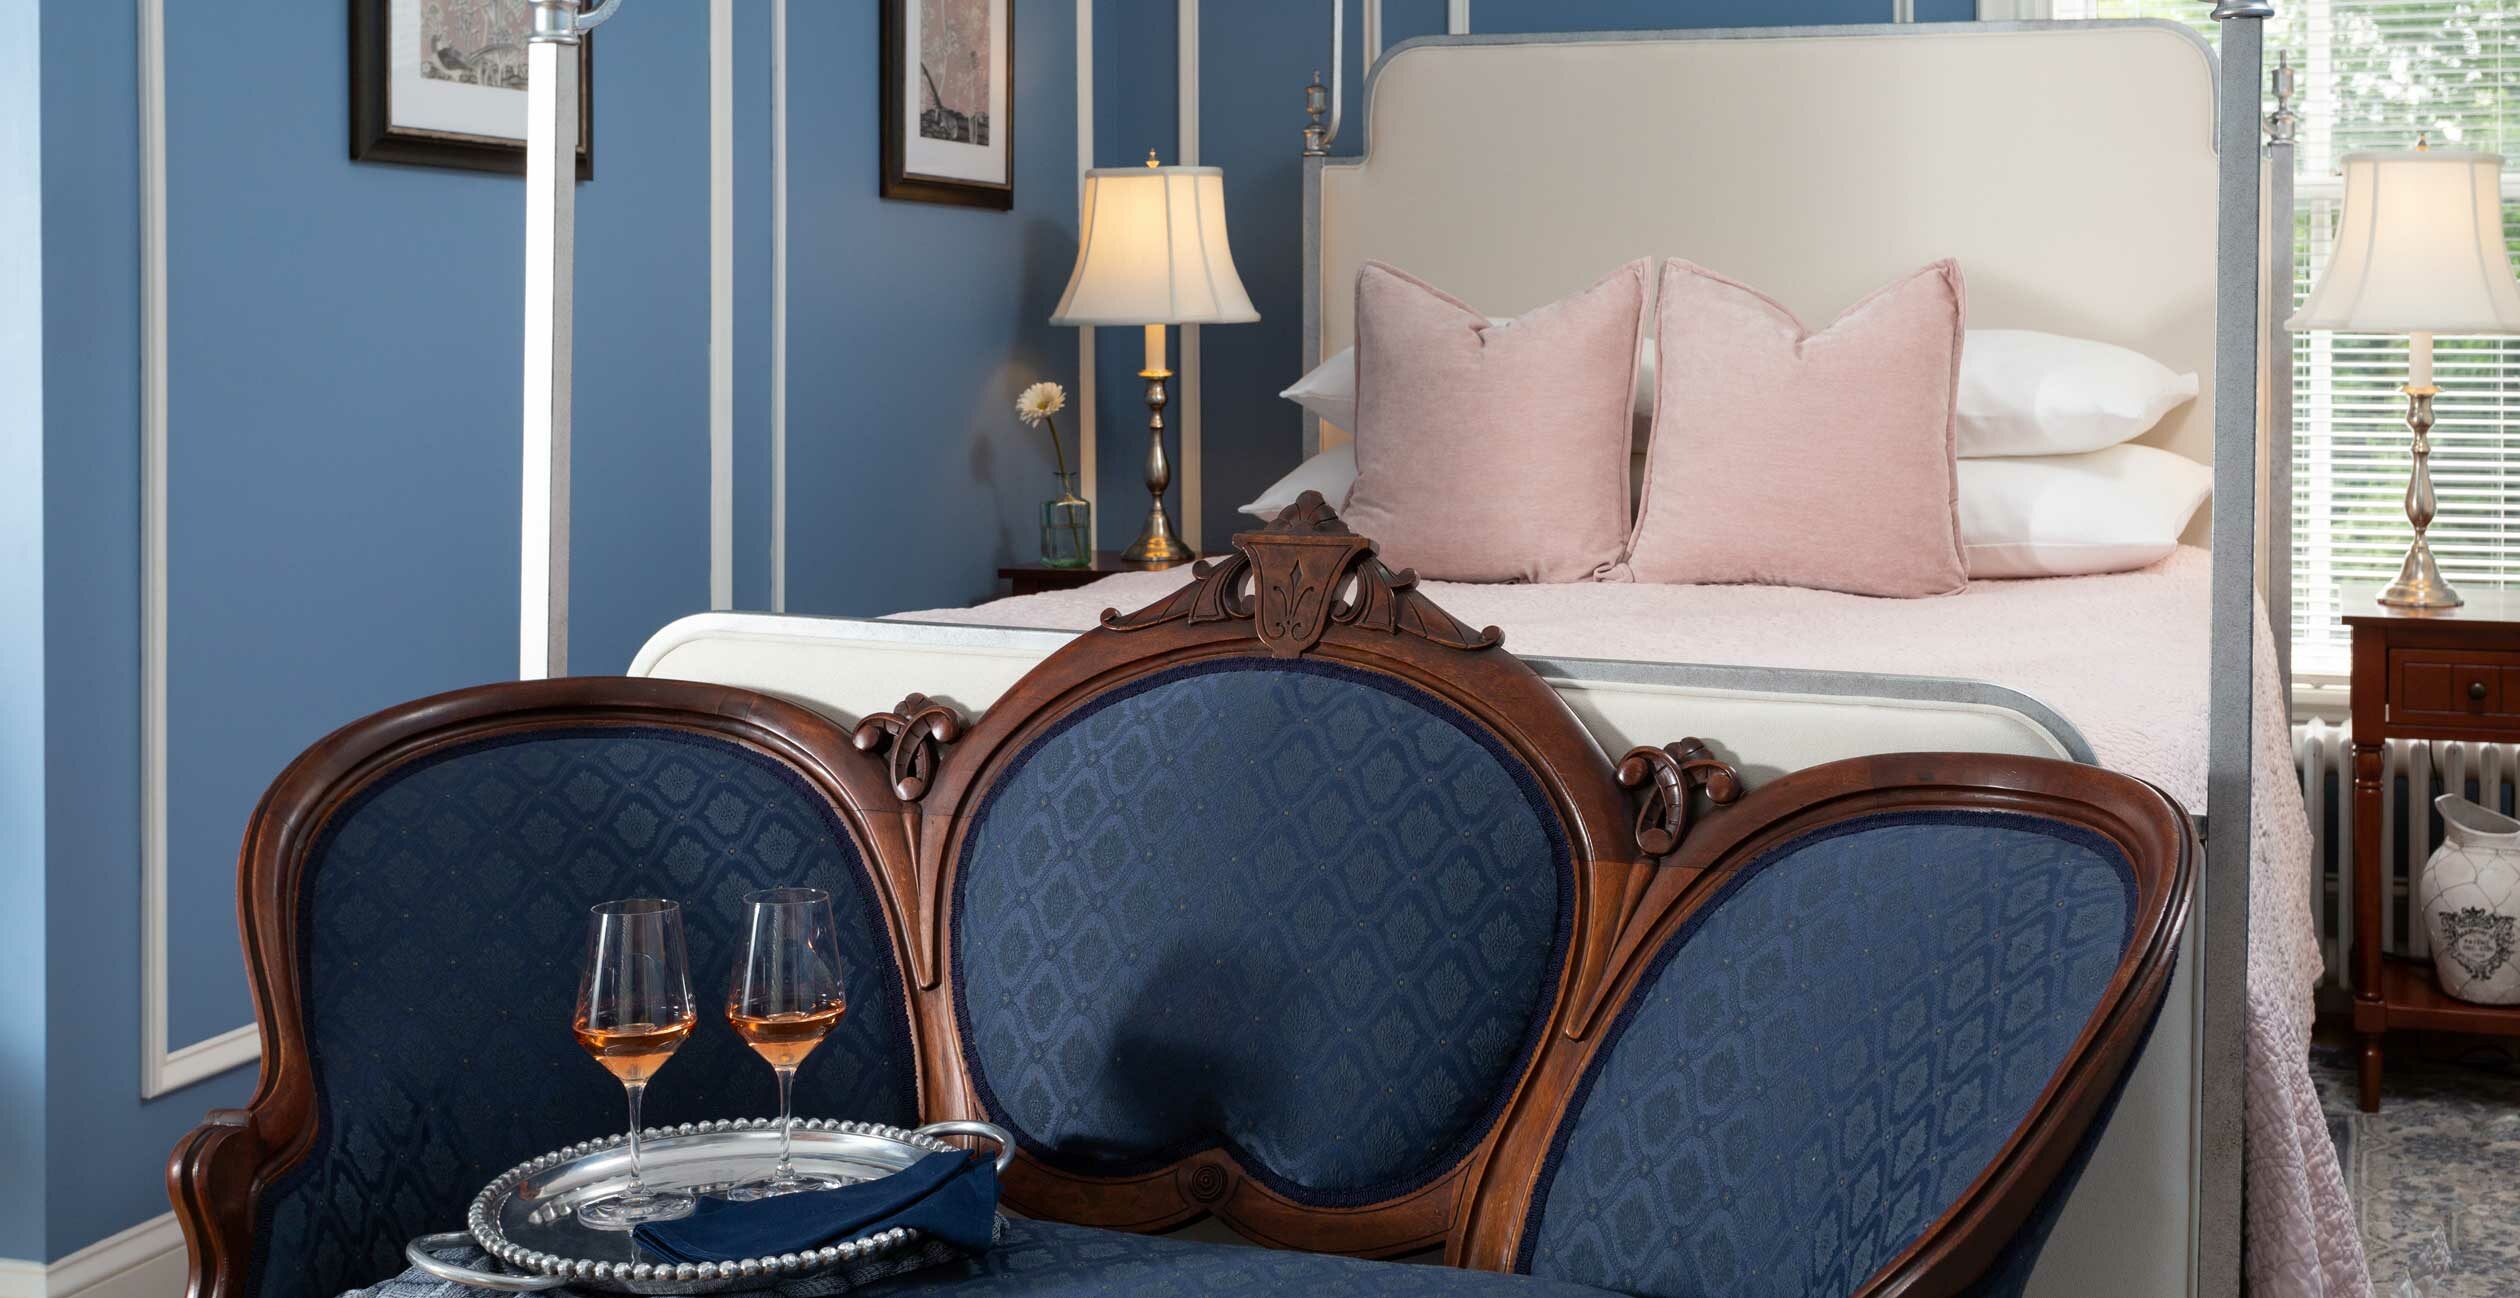 Queen bed in a room with a chair and table with two glasses of champagne